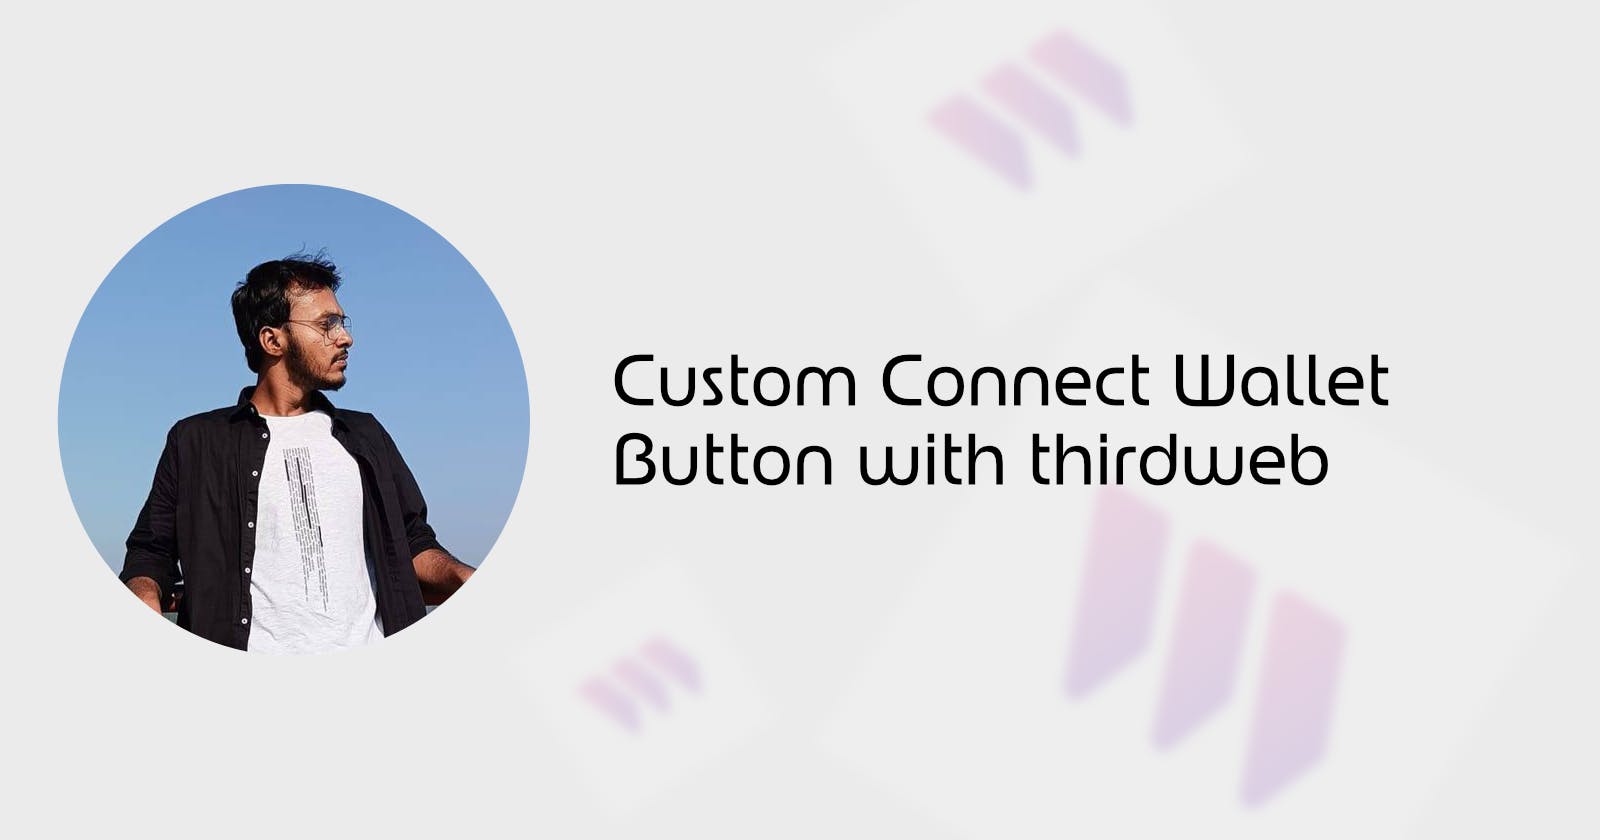 Custom Connect Wallet Button with thirdweb